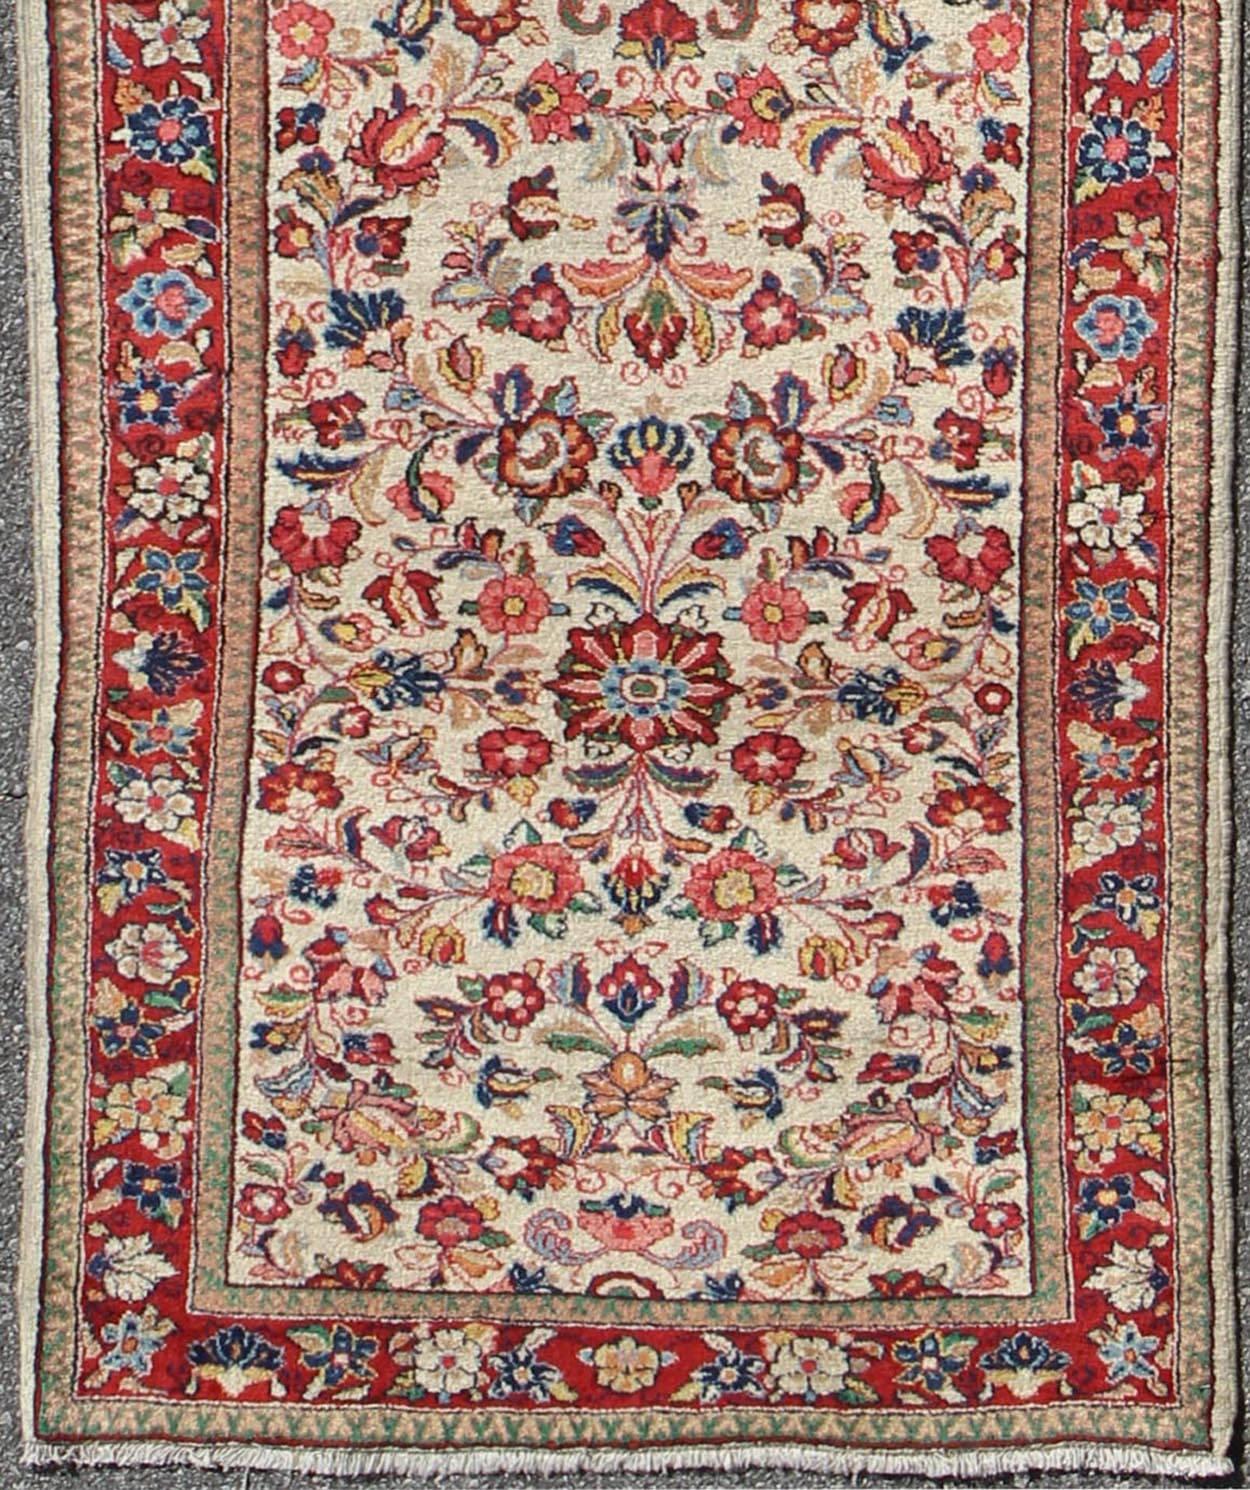 Antique Persian Sarouk rug all-over floral design in rich red and ivory, rug/DSP-CA4448, country of origin / type: Iran / Sarouk, circa 1930

This immaculately woven 1930's Ivory Sarouk rug represents the best in the world of Persian weaving. A